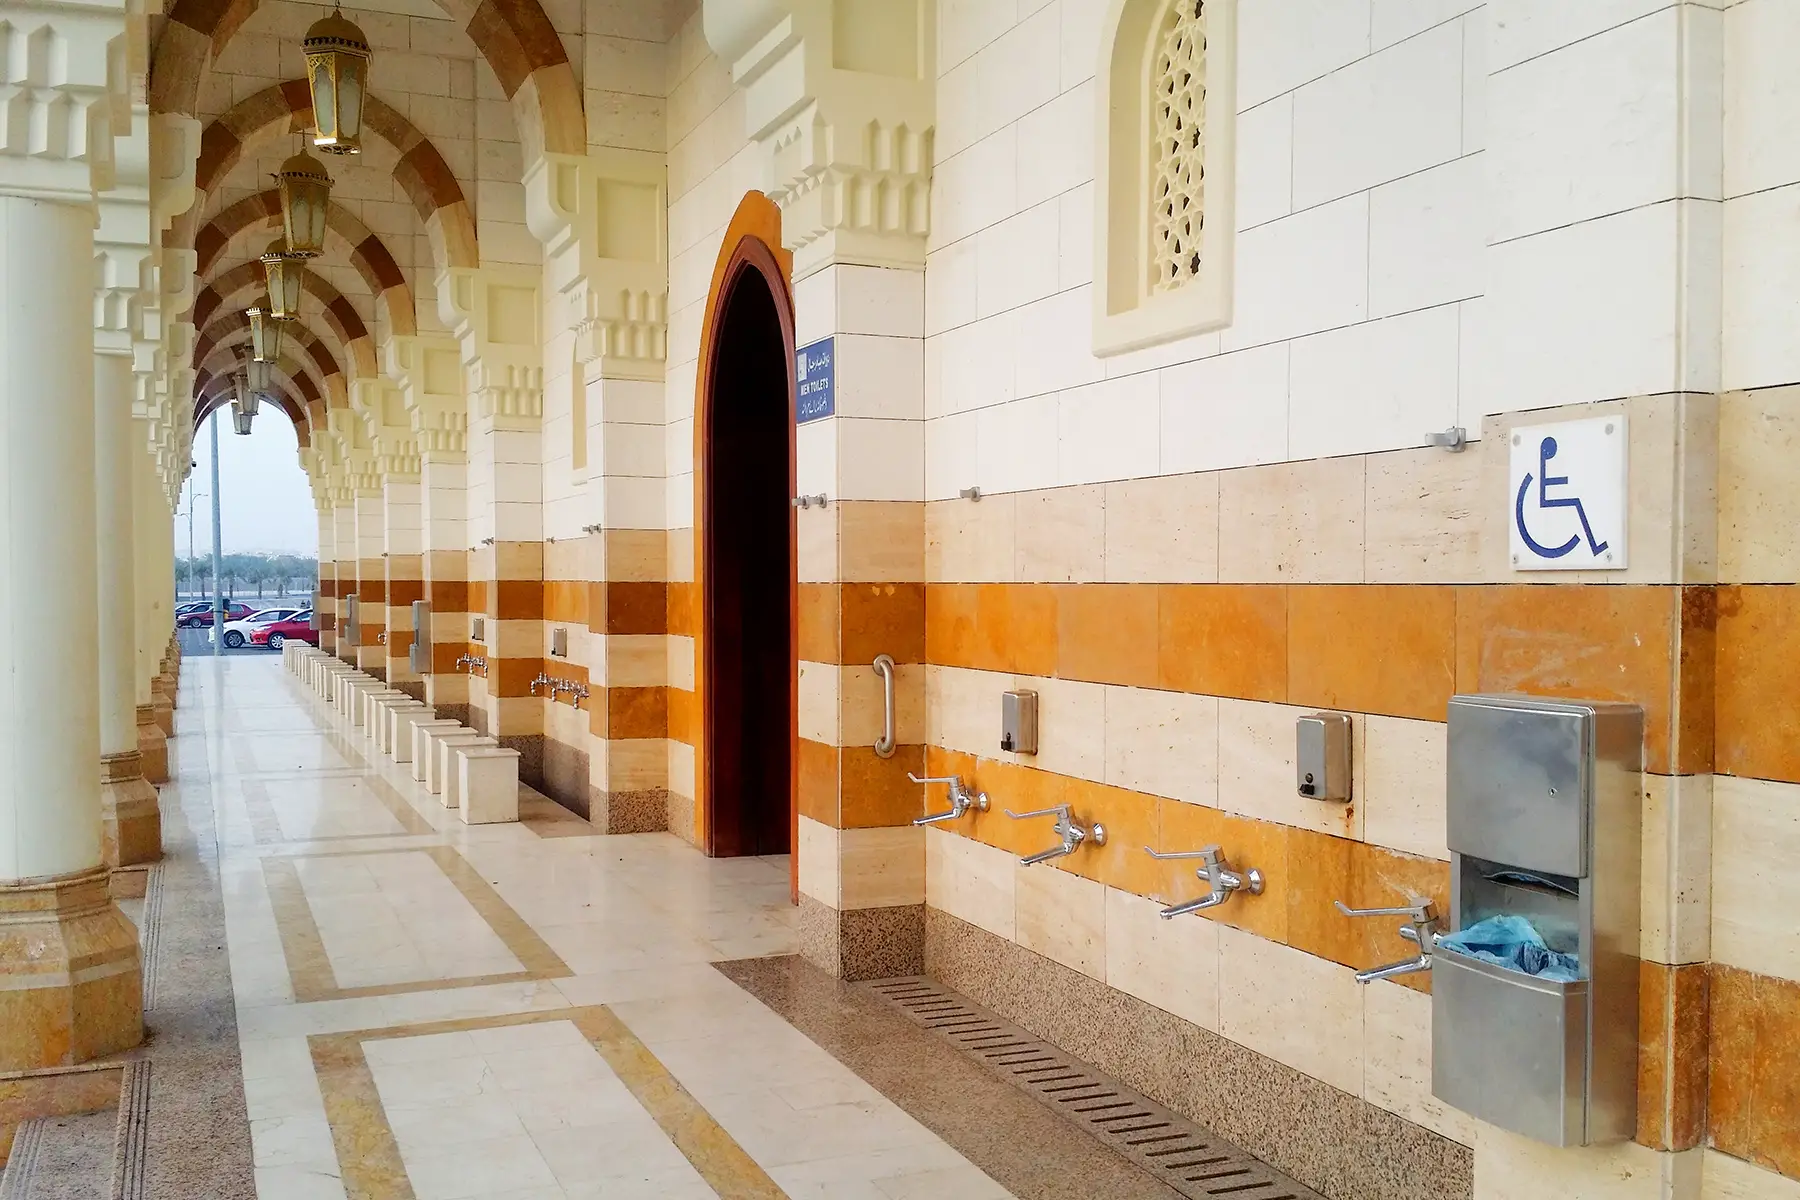 Faucets for washing outside a mosque, with a disabled sign outside